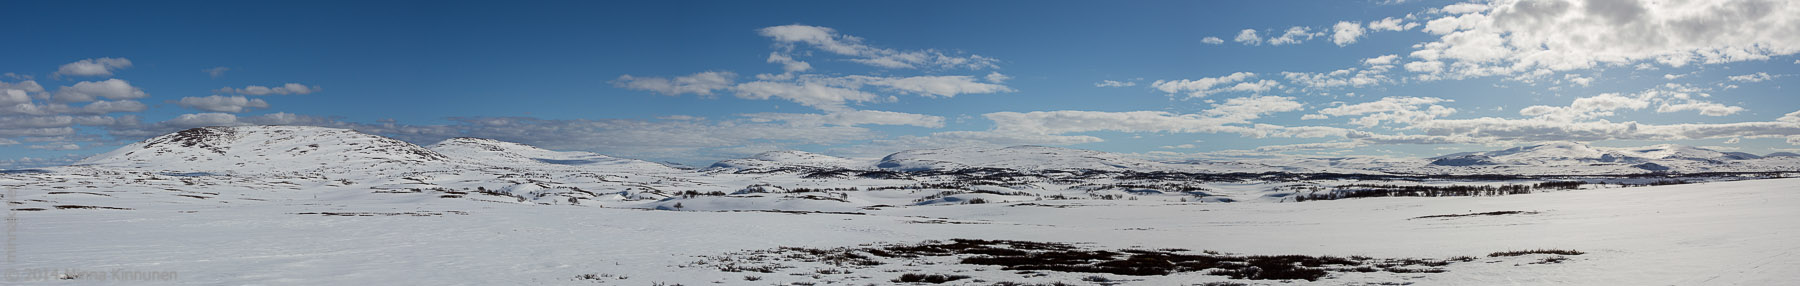 View over the plateau